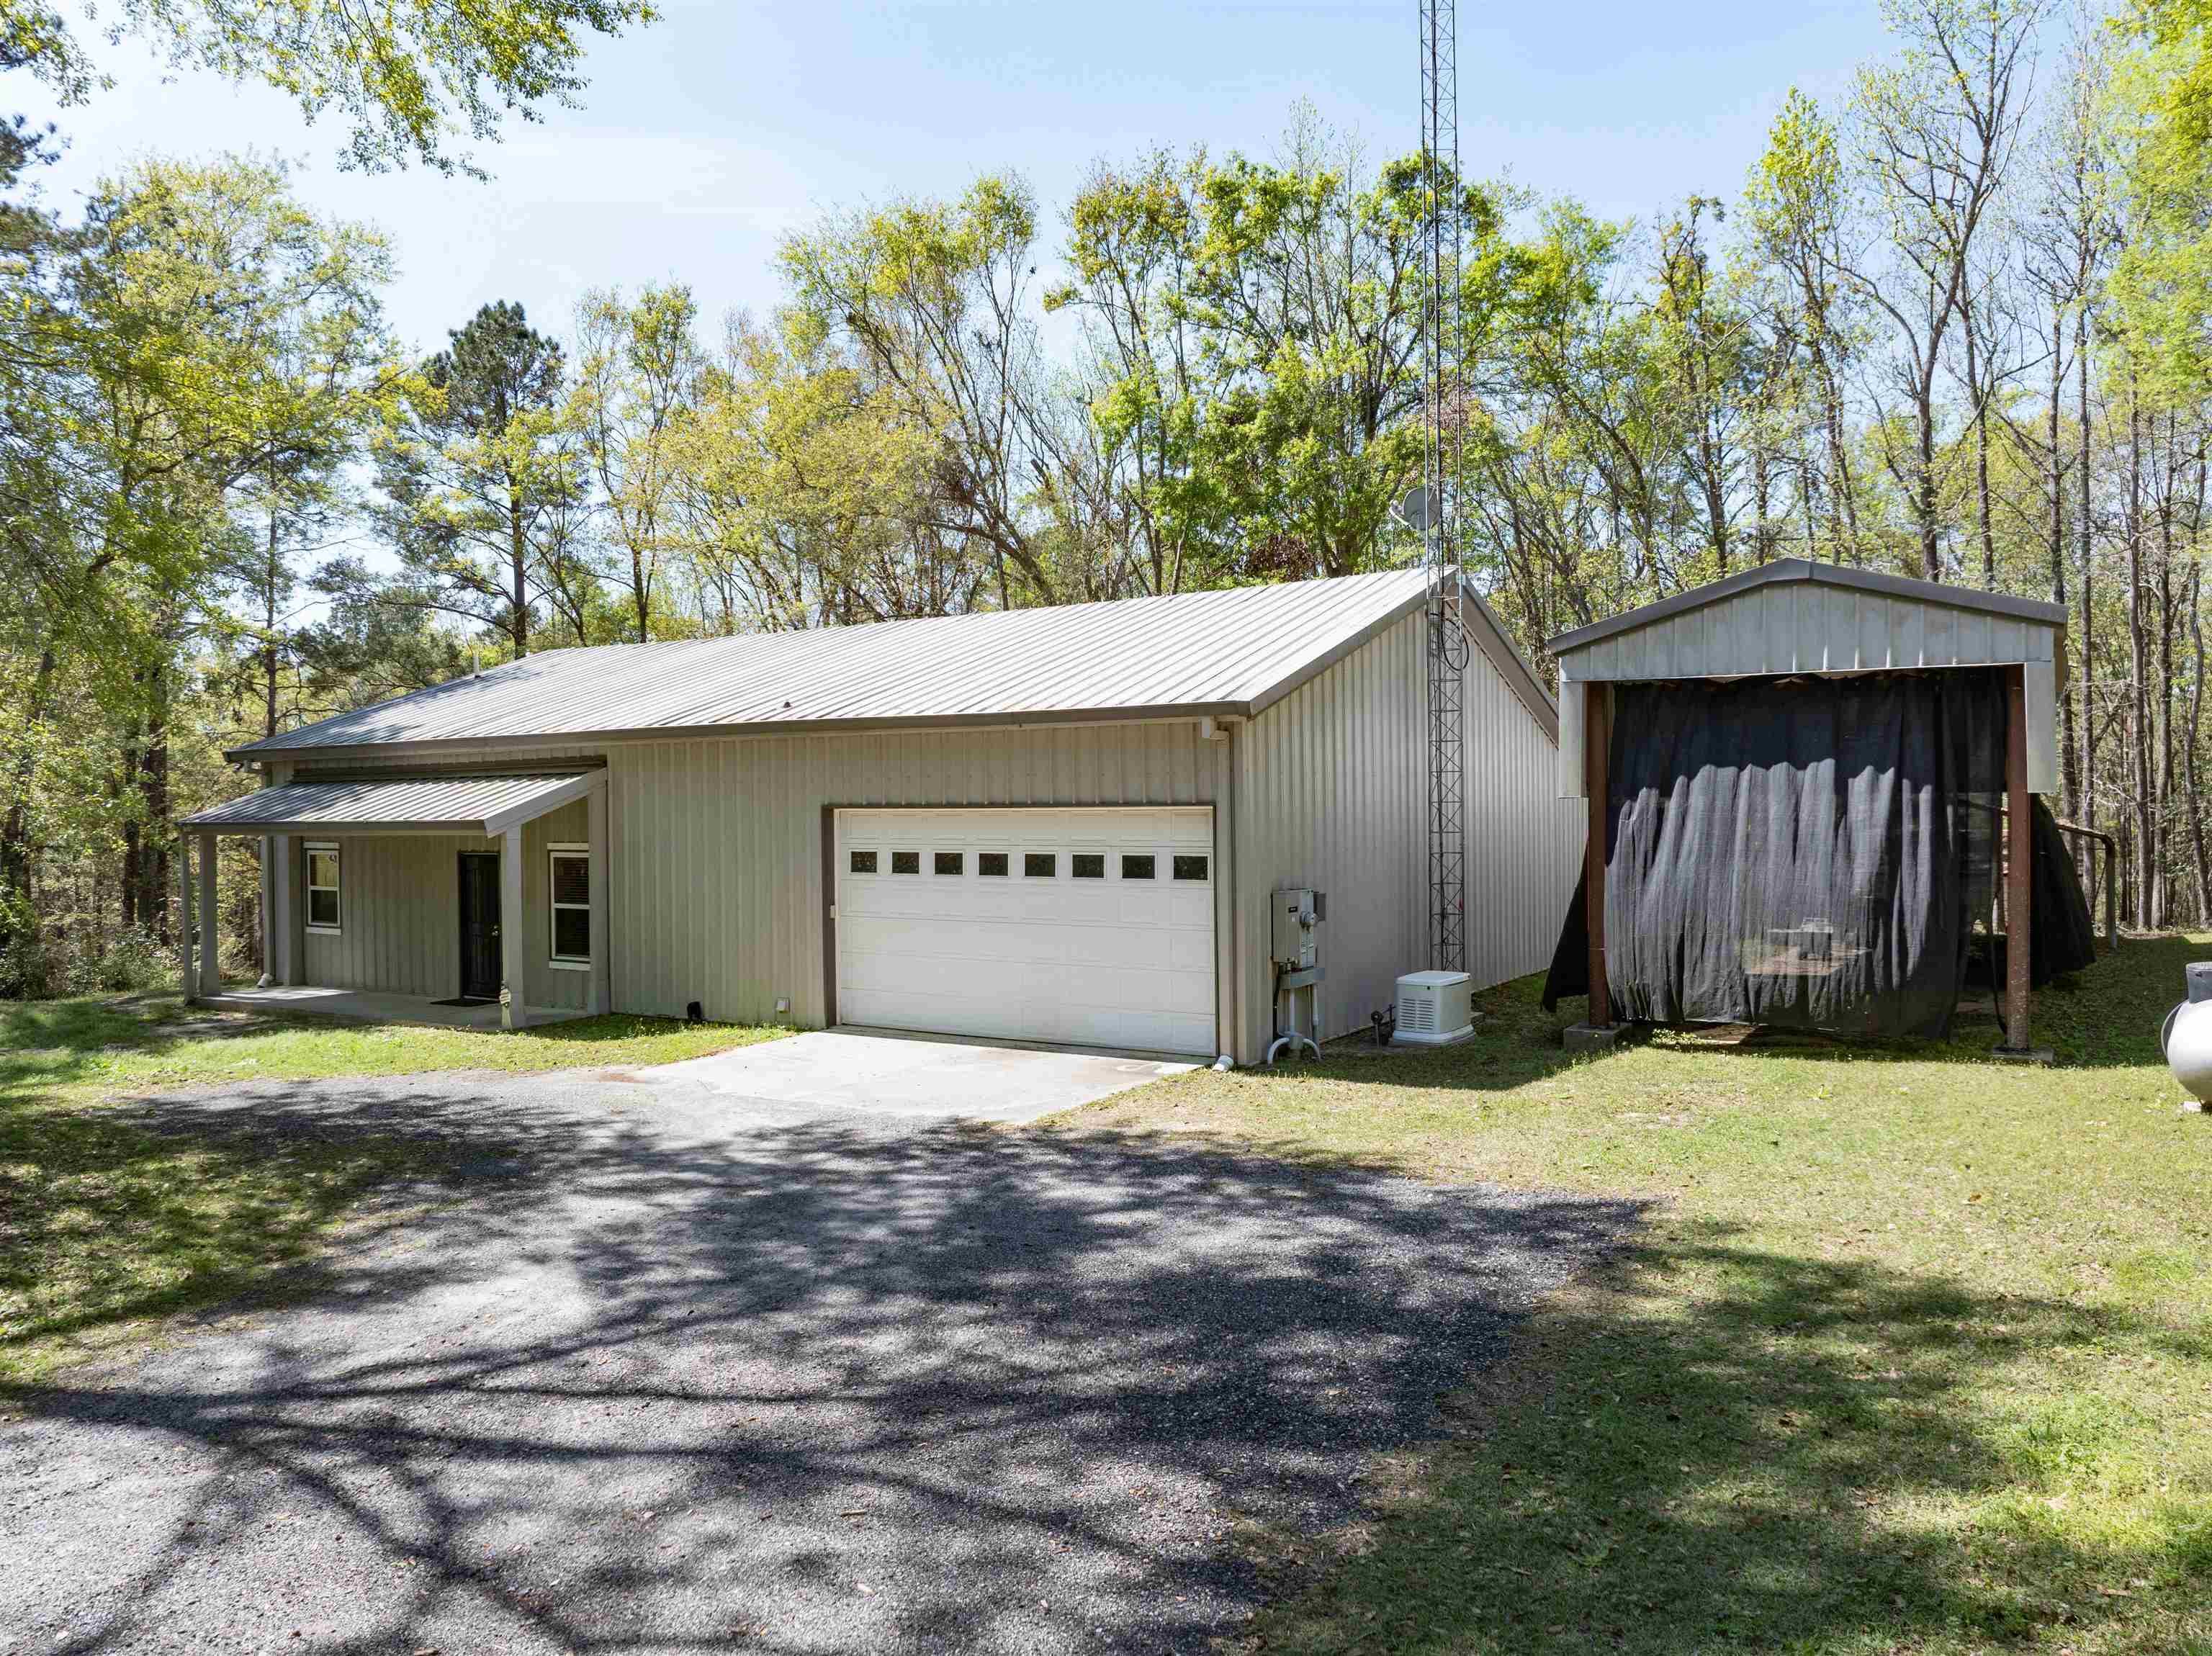 845 NW 16th Avenue,JENNINGS,Florida 32053,2 Bedrooms Bedrooms,2 BathroomsBathrooms,Detached single family,845 NW 16th Avenue,369719